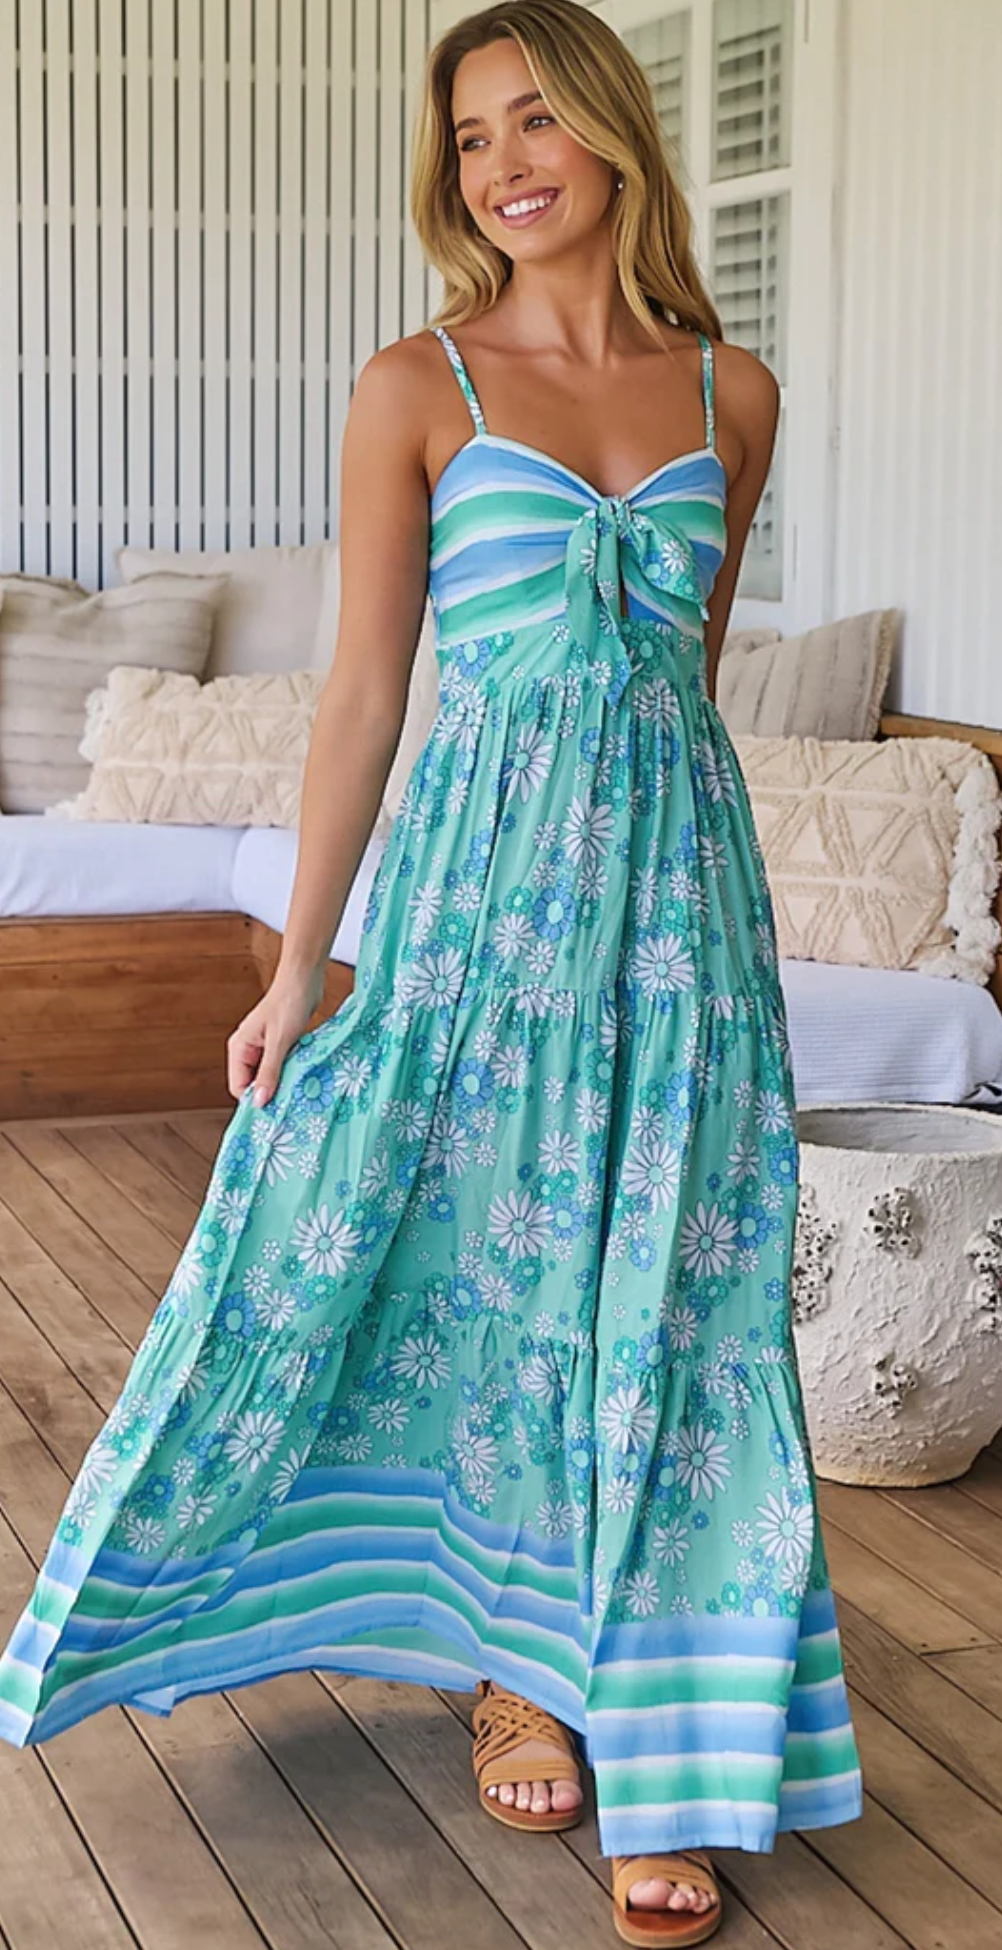 Feel free and feminine in our Bambi Maxi - Malina Print! Elasticised back and adjustable straps provide a comfortable fit, while the tie up bust adds a flirty touch. The tiered skirt adds movement and flow, making you stand out in any occasion. Embrace your playful side with this must-have piece!